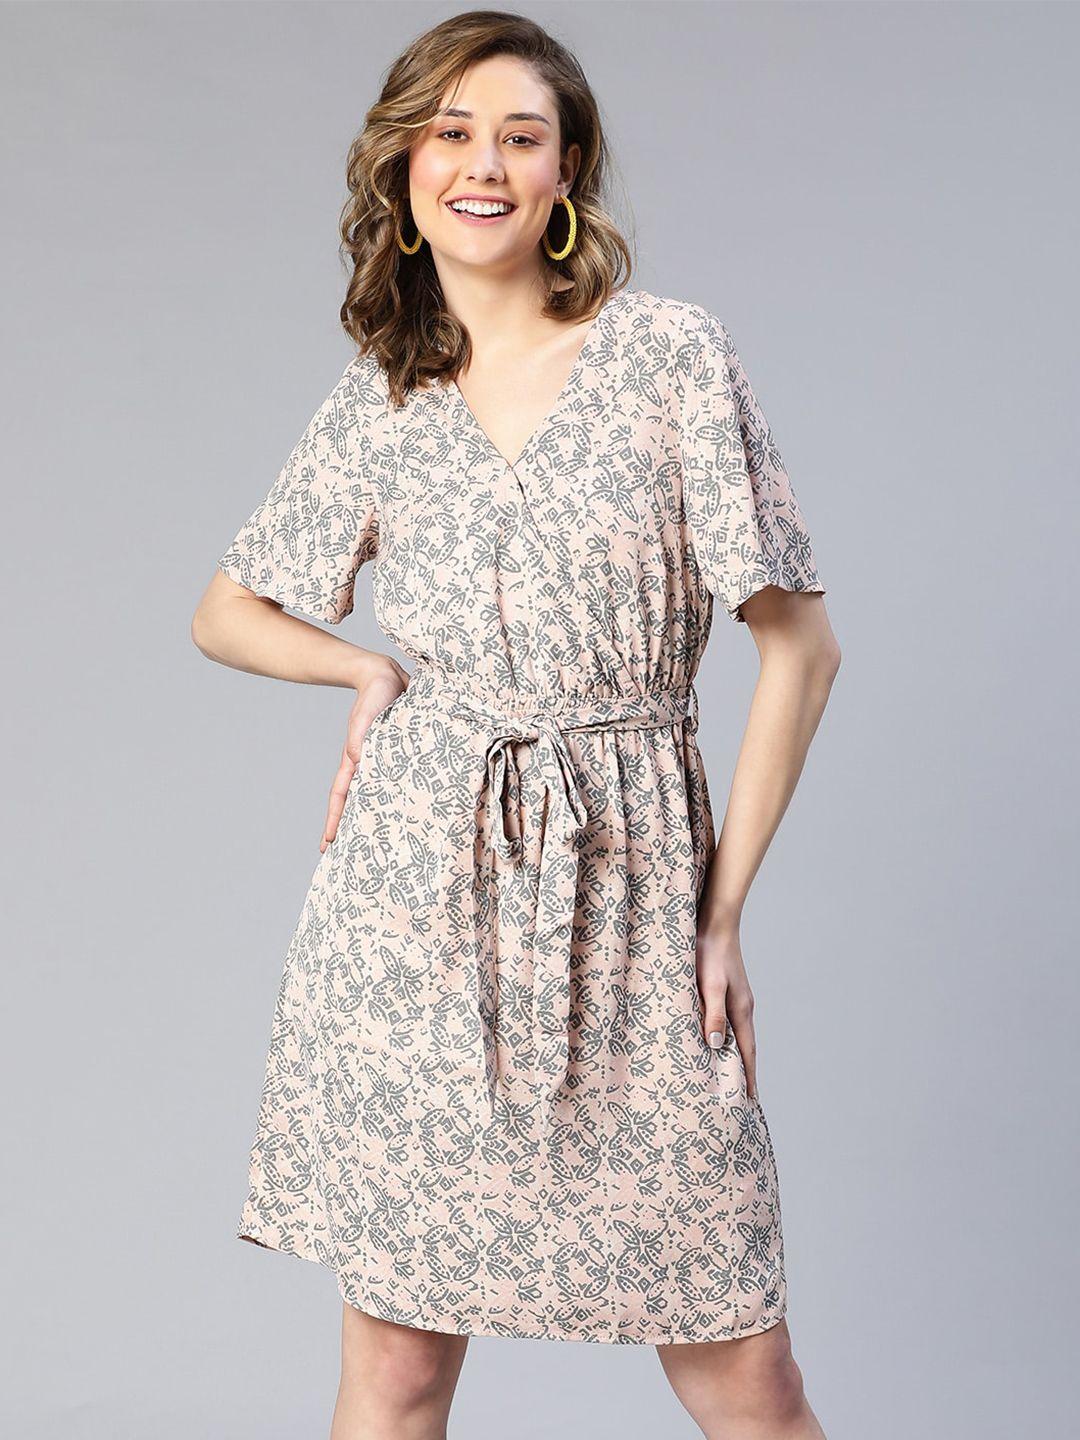 oxolloxo floral printed a-line dress